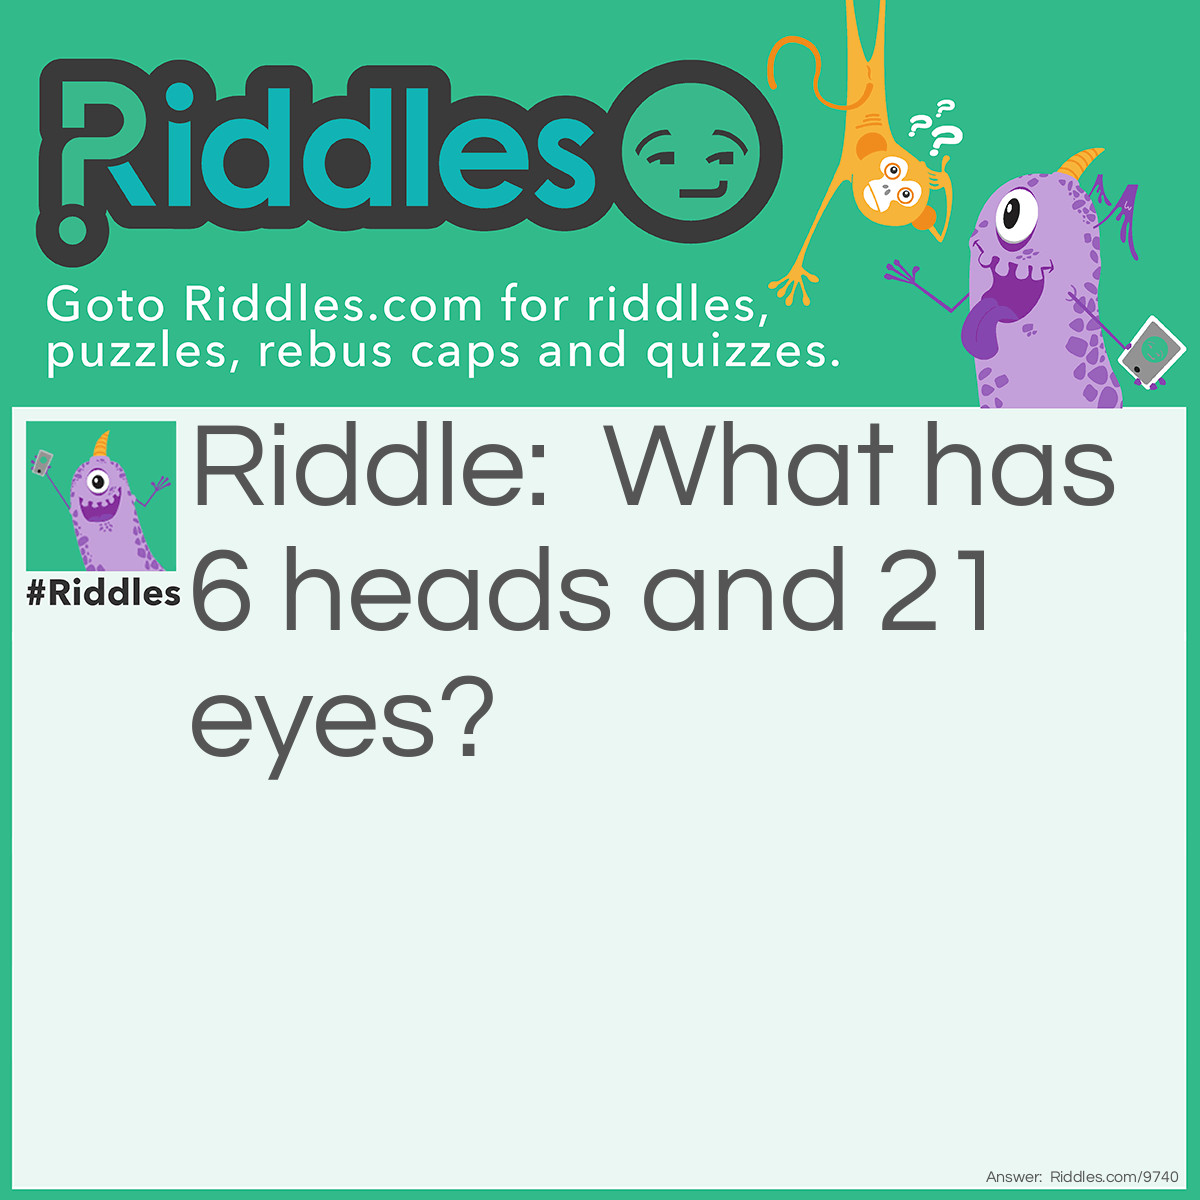 Riddle: What has 6 heads and 21 eyes? Answer: A Dice.